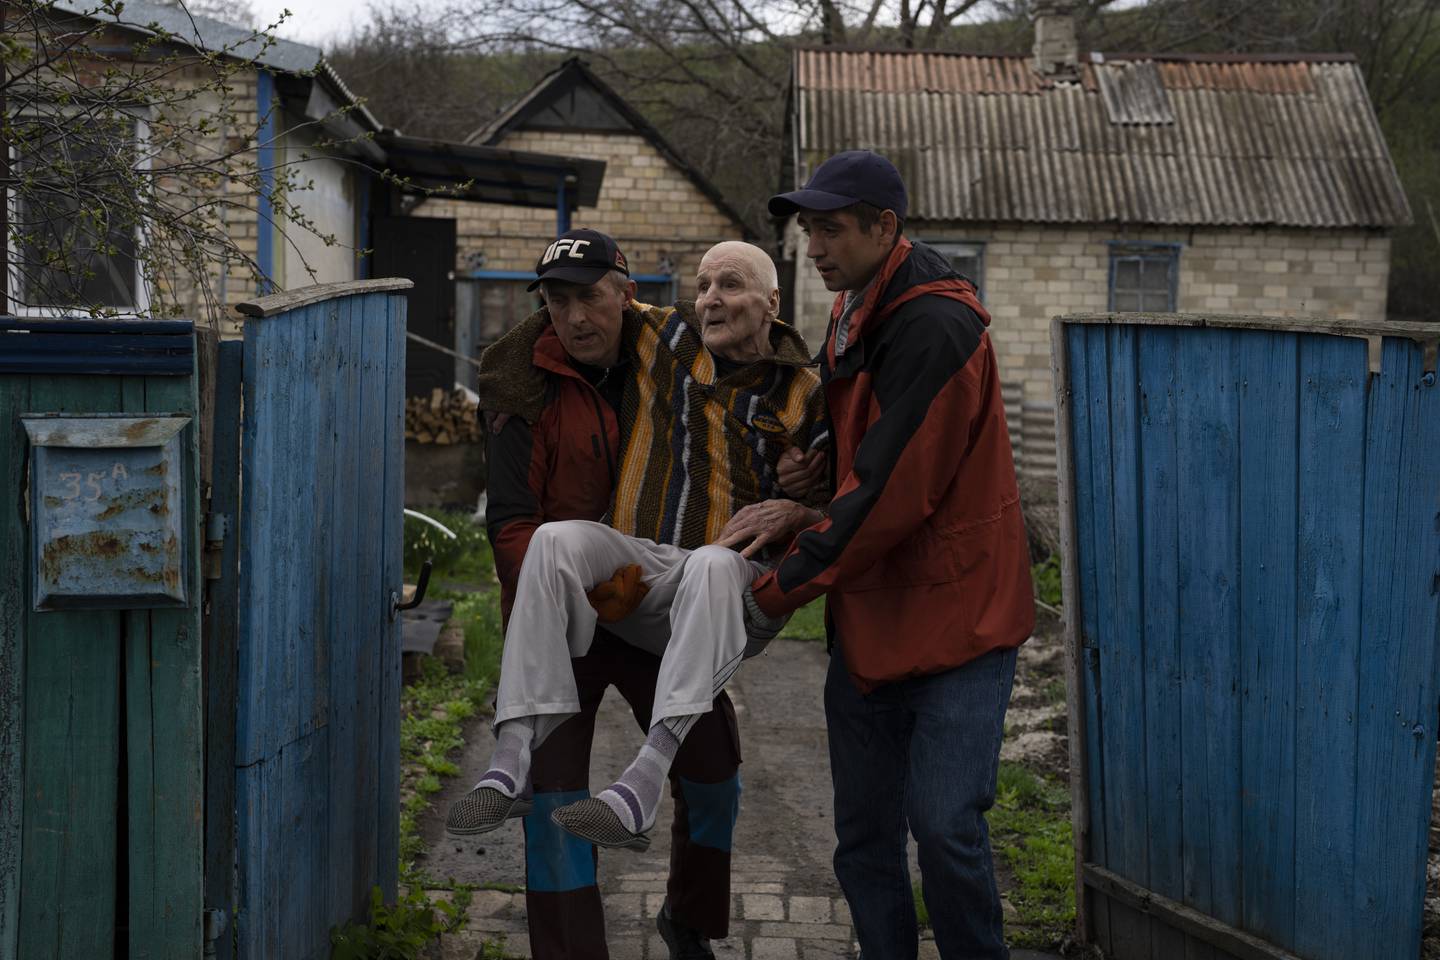 Elderly people are evacuated from a hospice in Chasiv Yar city, Donetsk district, Ukraine, Monday, April 18, 2022. At least 35 men and women, some in wheelchairs and most of them with mobility issues, were helped by volunteers to flee from the region that has been under attack in the last weeks. They are being transported to Khmelnytskyi, in western Ukraine. (AP Photo/Petros Giannakouris)